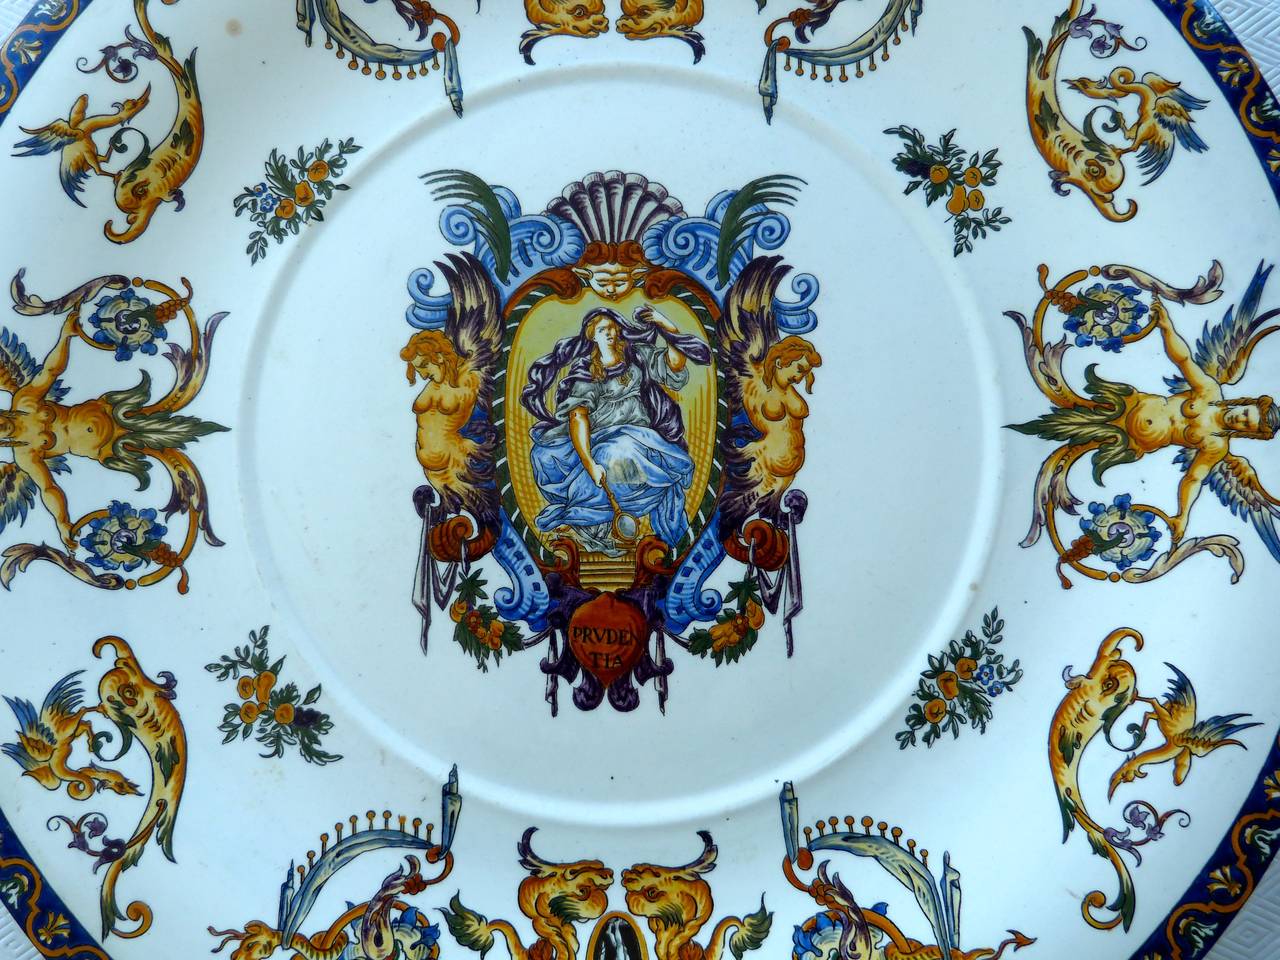 A late 19th century French Gien Istoriato Renaissance Revival faience charger, circa 1880.
The factory mark is in the back of the charger.